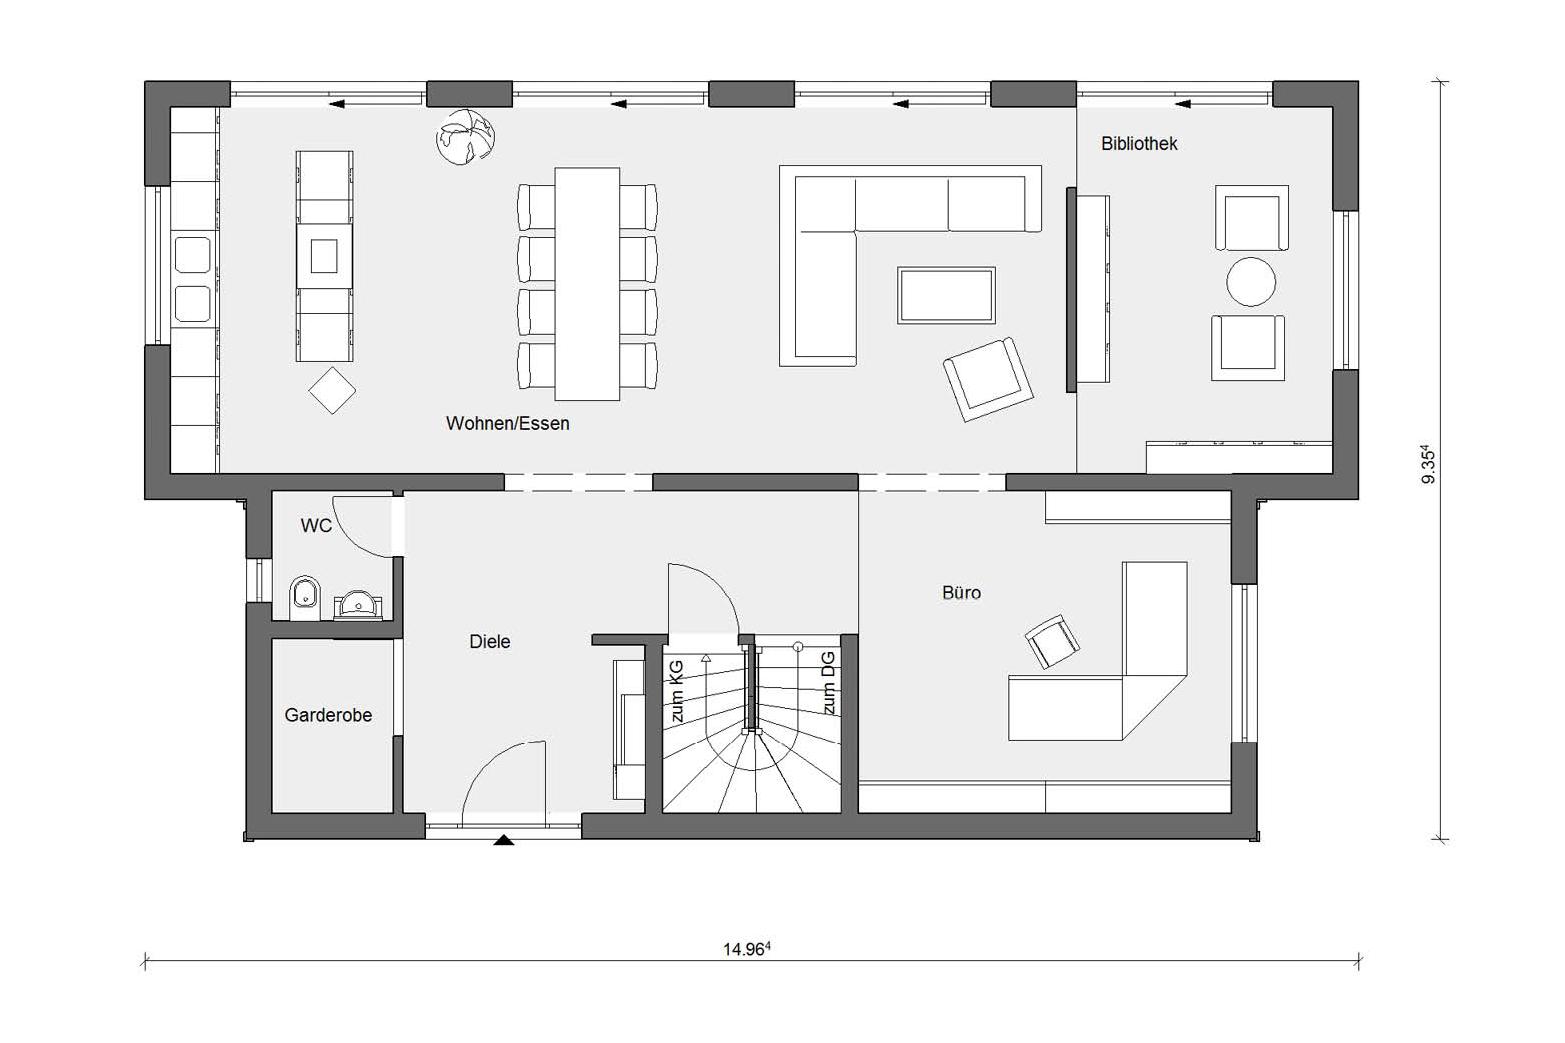 Ground floor plan E 15-217.1 Prefabricated house with 200sqm